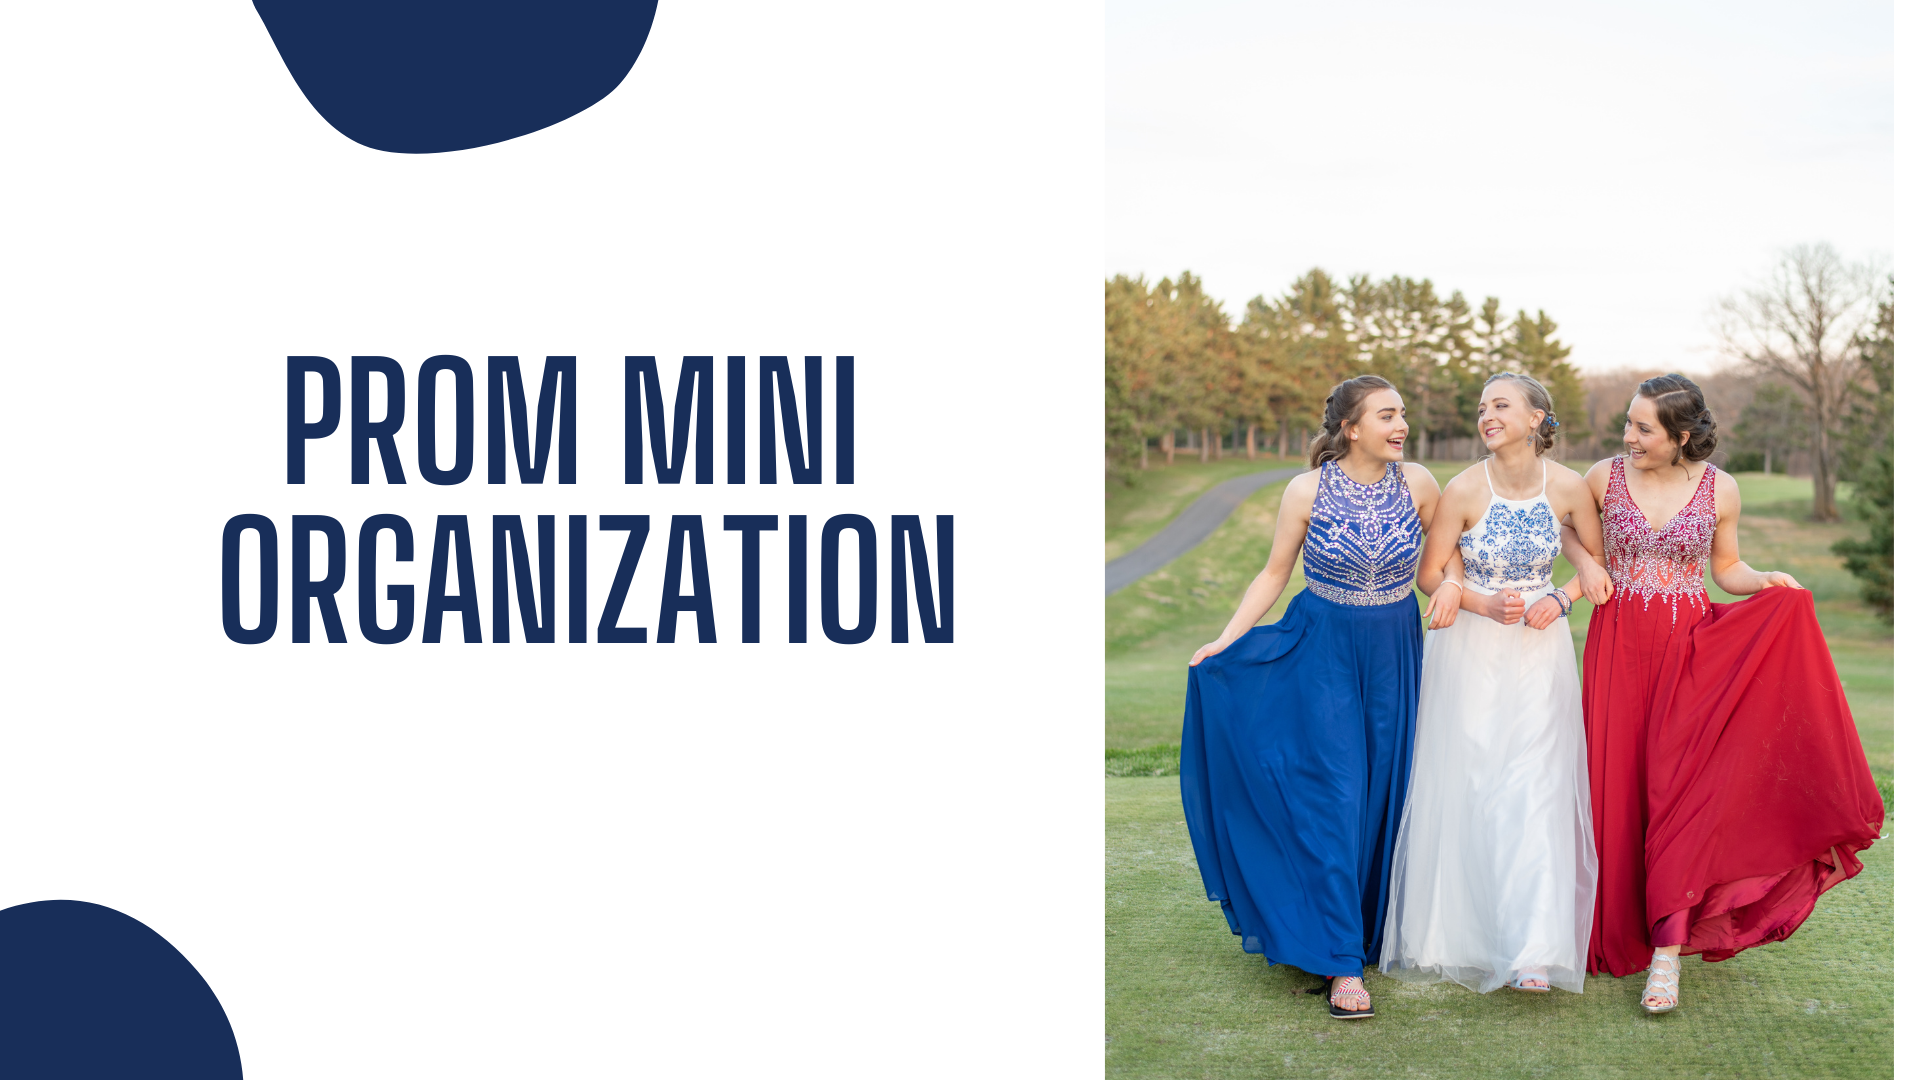 How to Organize Prom Mini Sessions